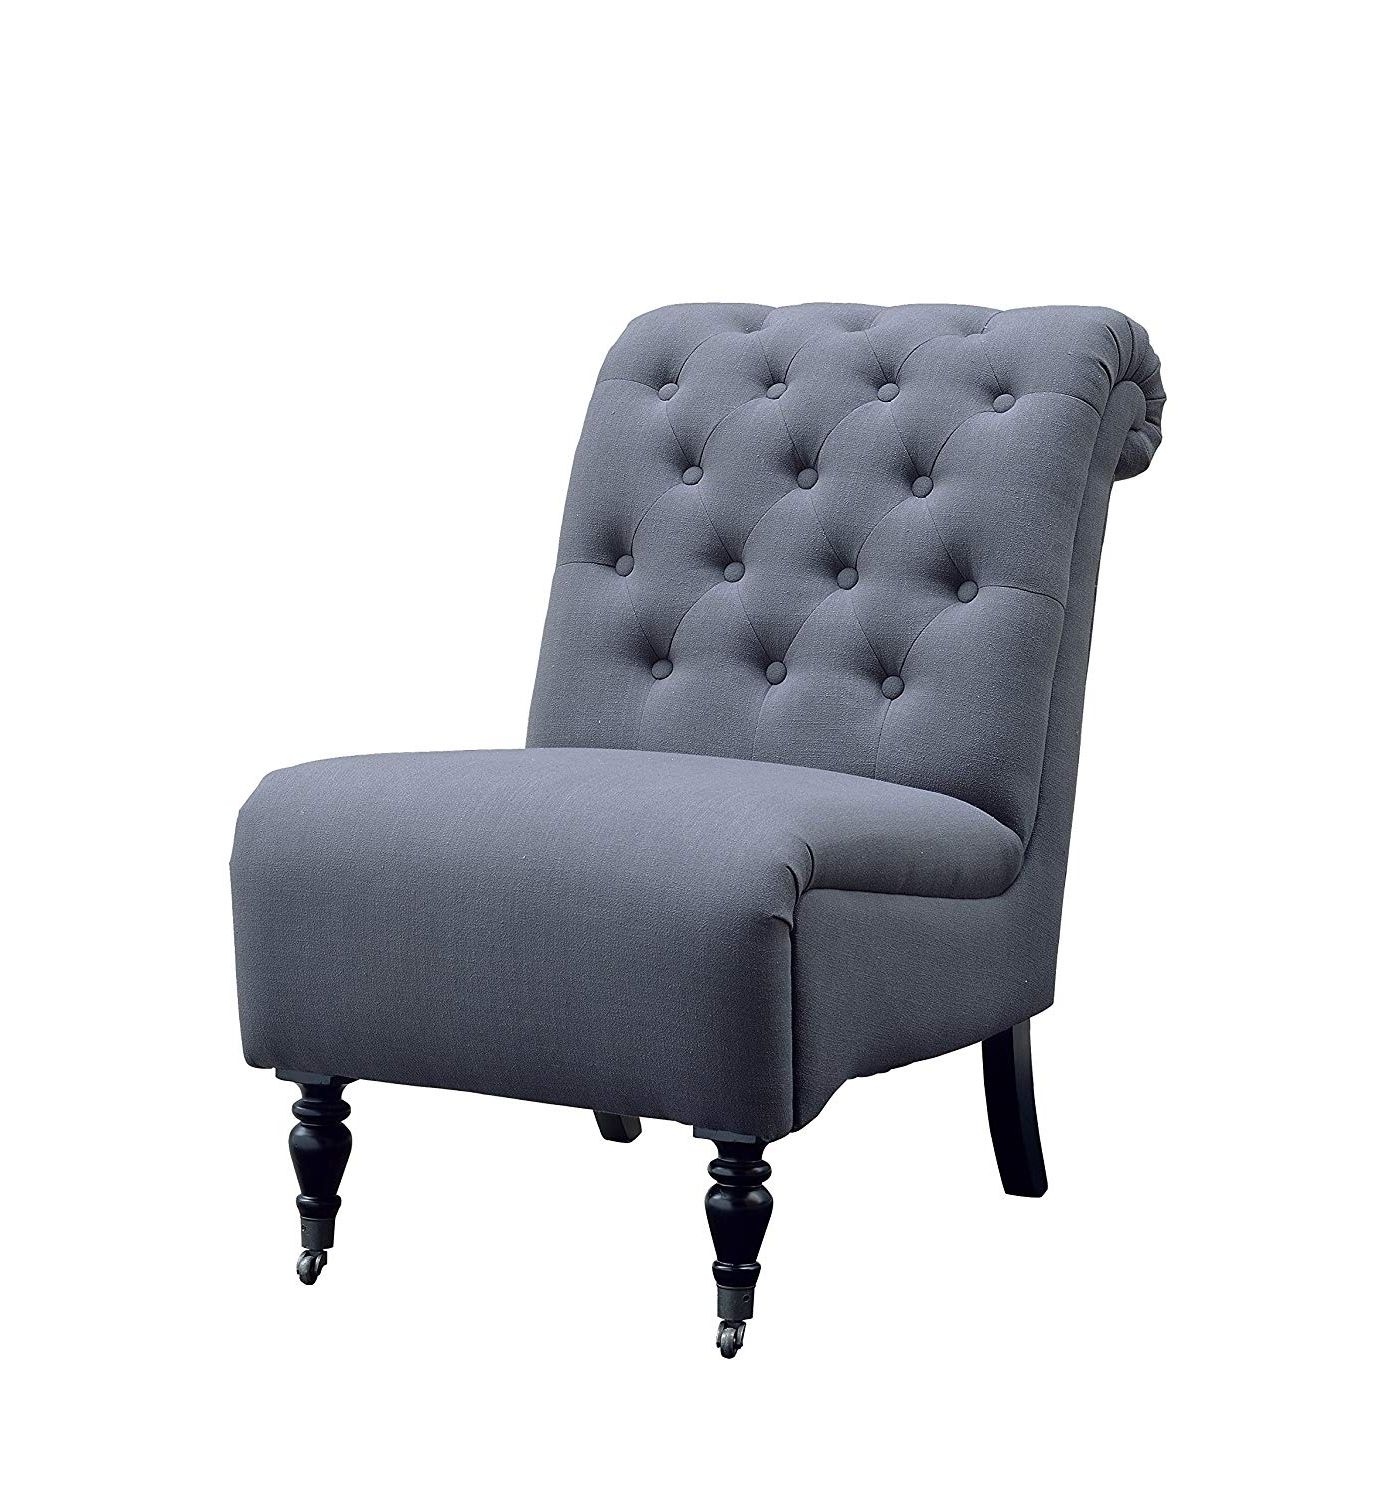 Cora Ii Arm Chairs With Regard To Well Liked Amazon: Linon Cora Charcoal Roll Back Tufted Chair: Kitchen & Dining (View 8 of 20)